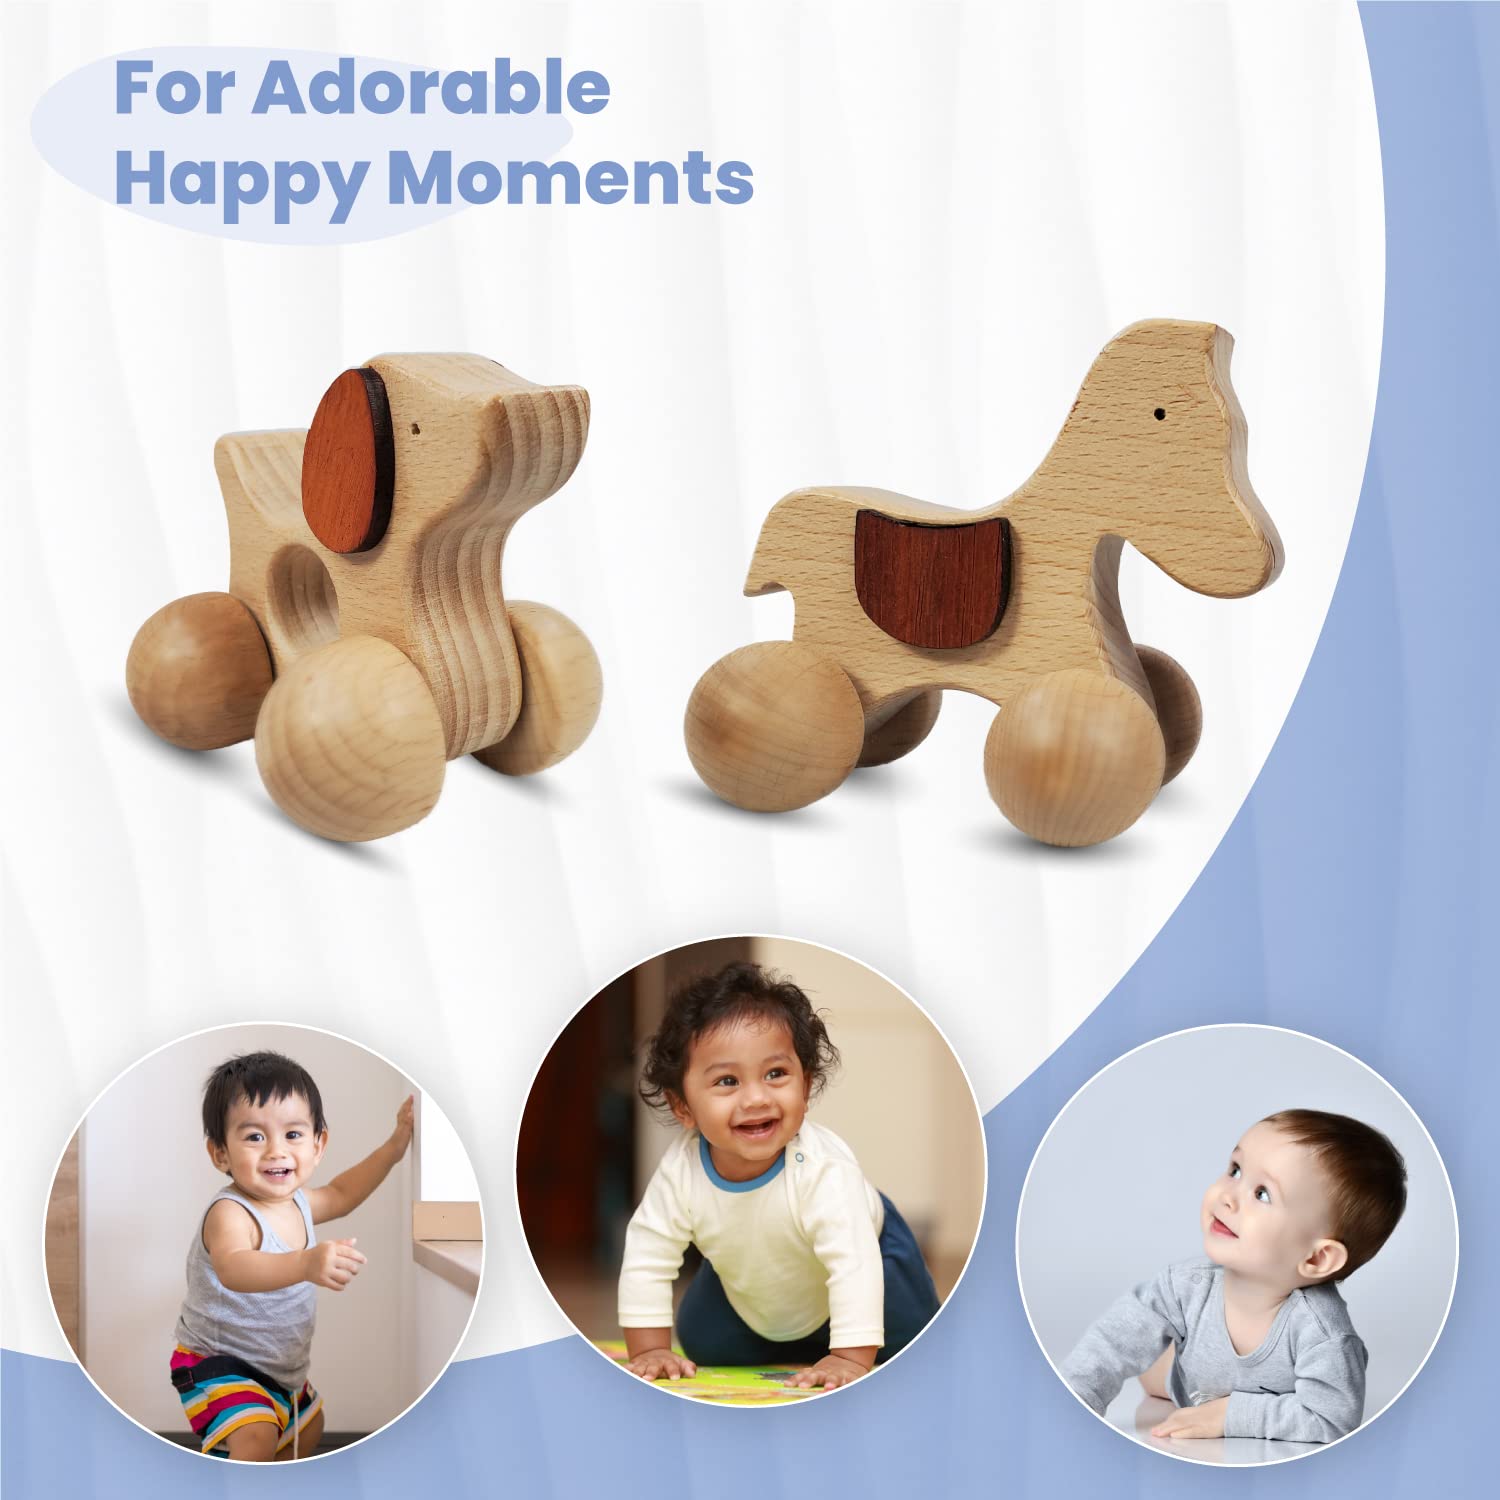 TEKOR Wooden Animal Push Toy with Wheels for Baby, Toddler Grasping & Teething - Montessori Wood Animal Car Set for Skill and Motor Development, Smooth, No Rough Edges (Pack of 2)